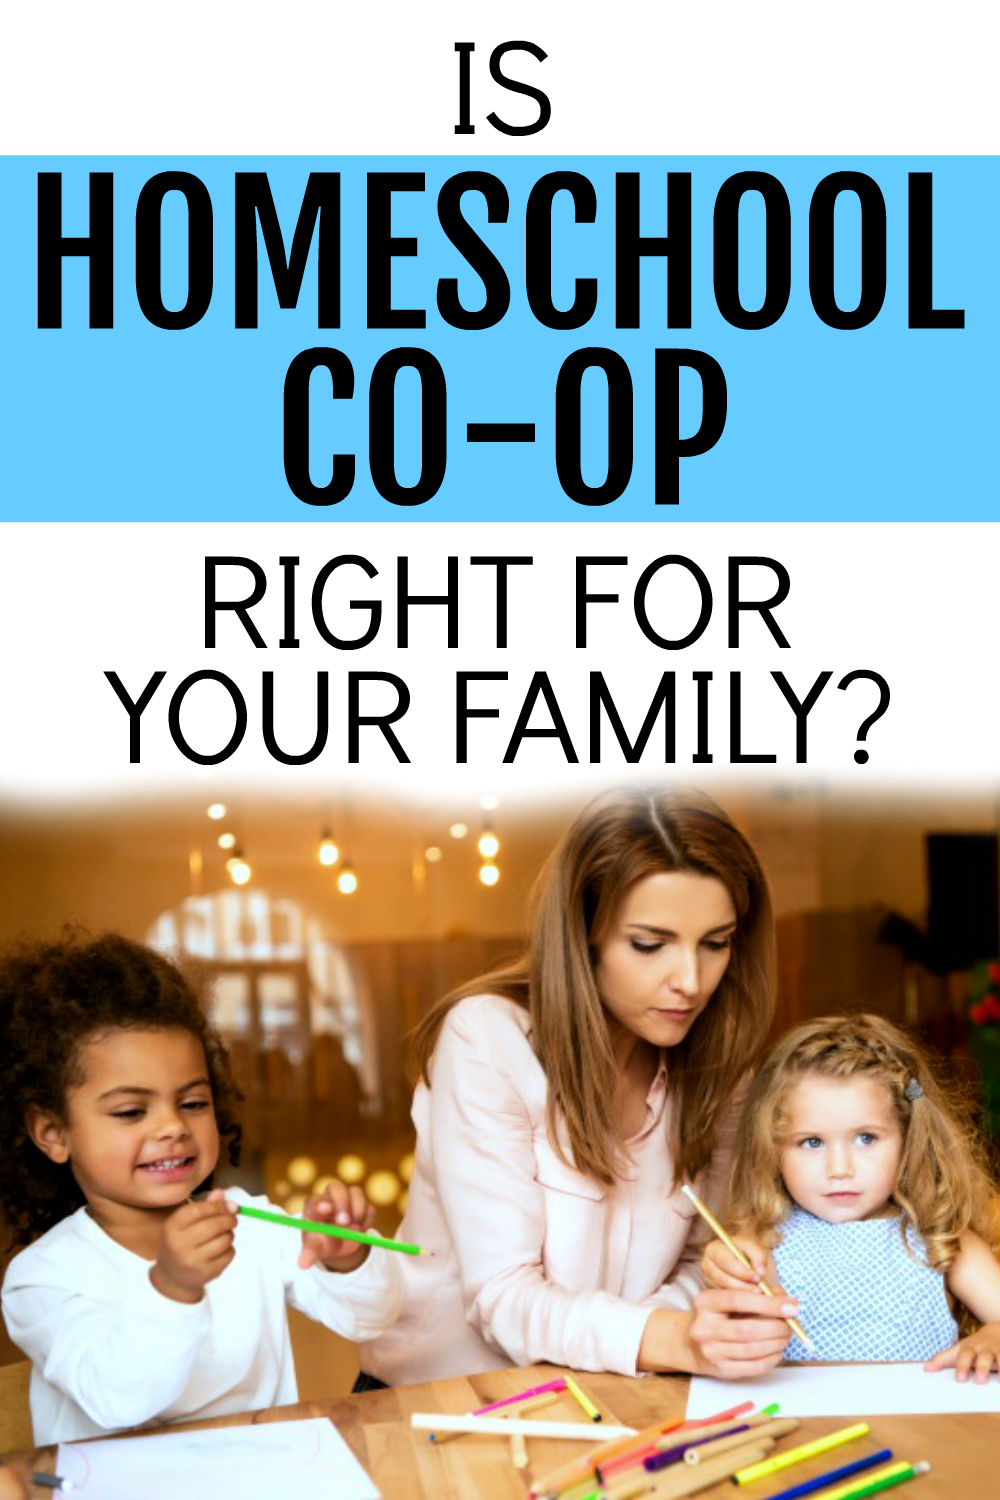 IS A HOMESCHOOL CO OP RIGHT FOR YOUR FAMILY?